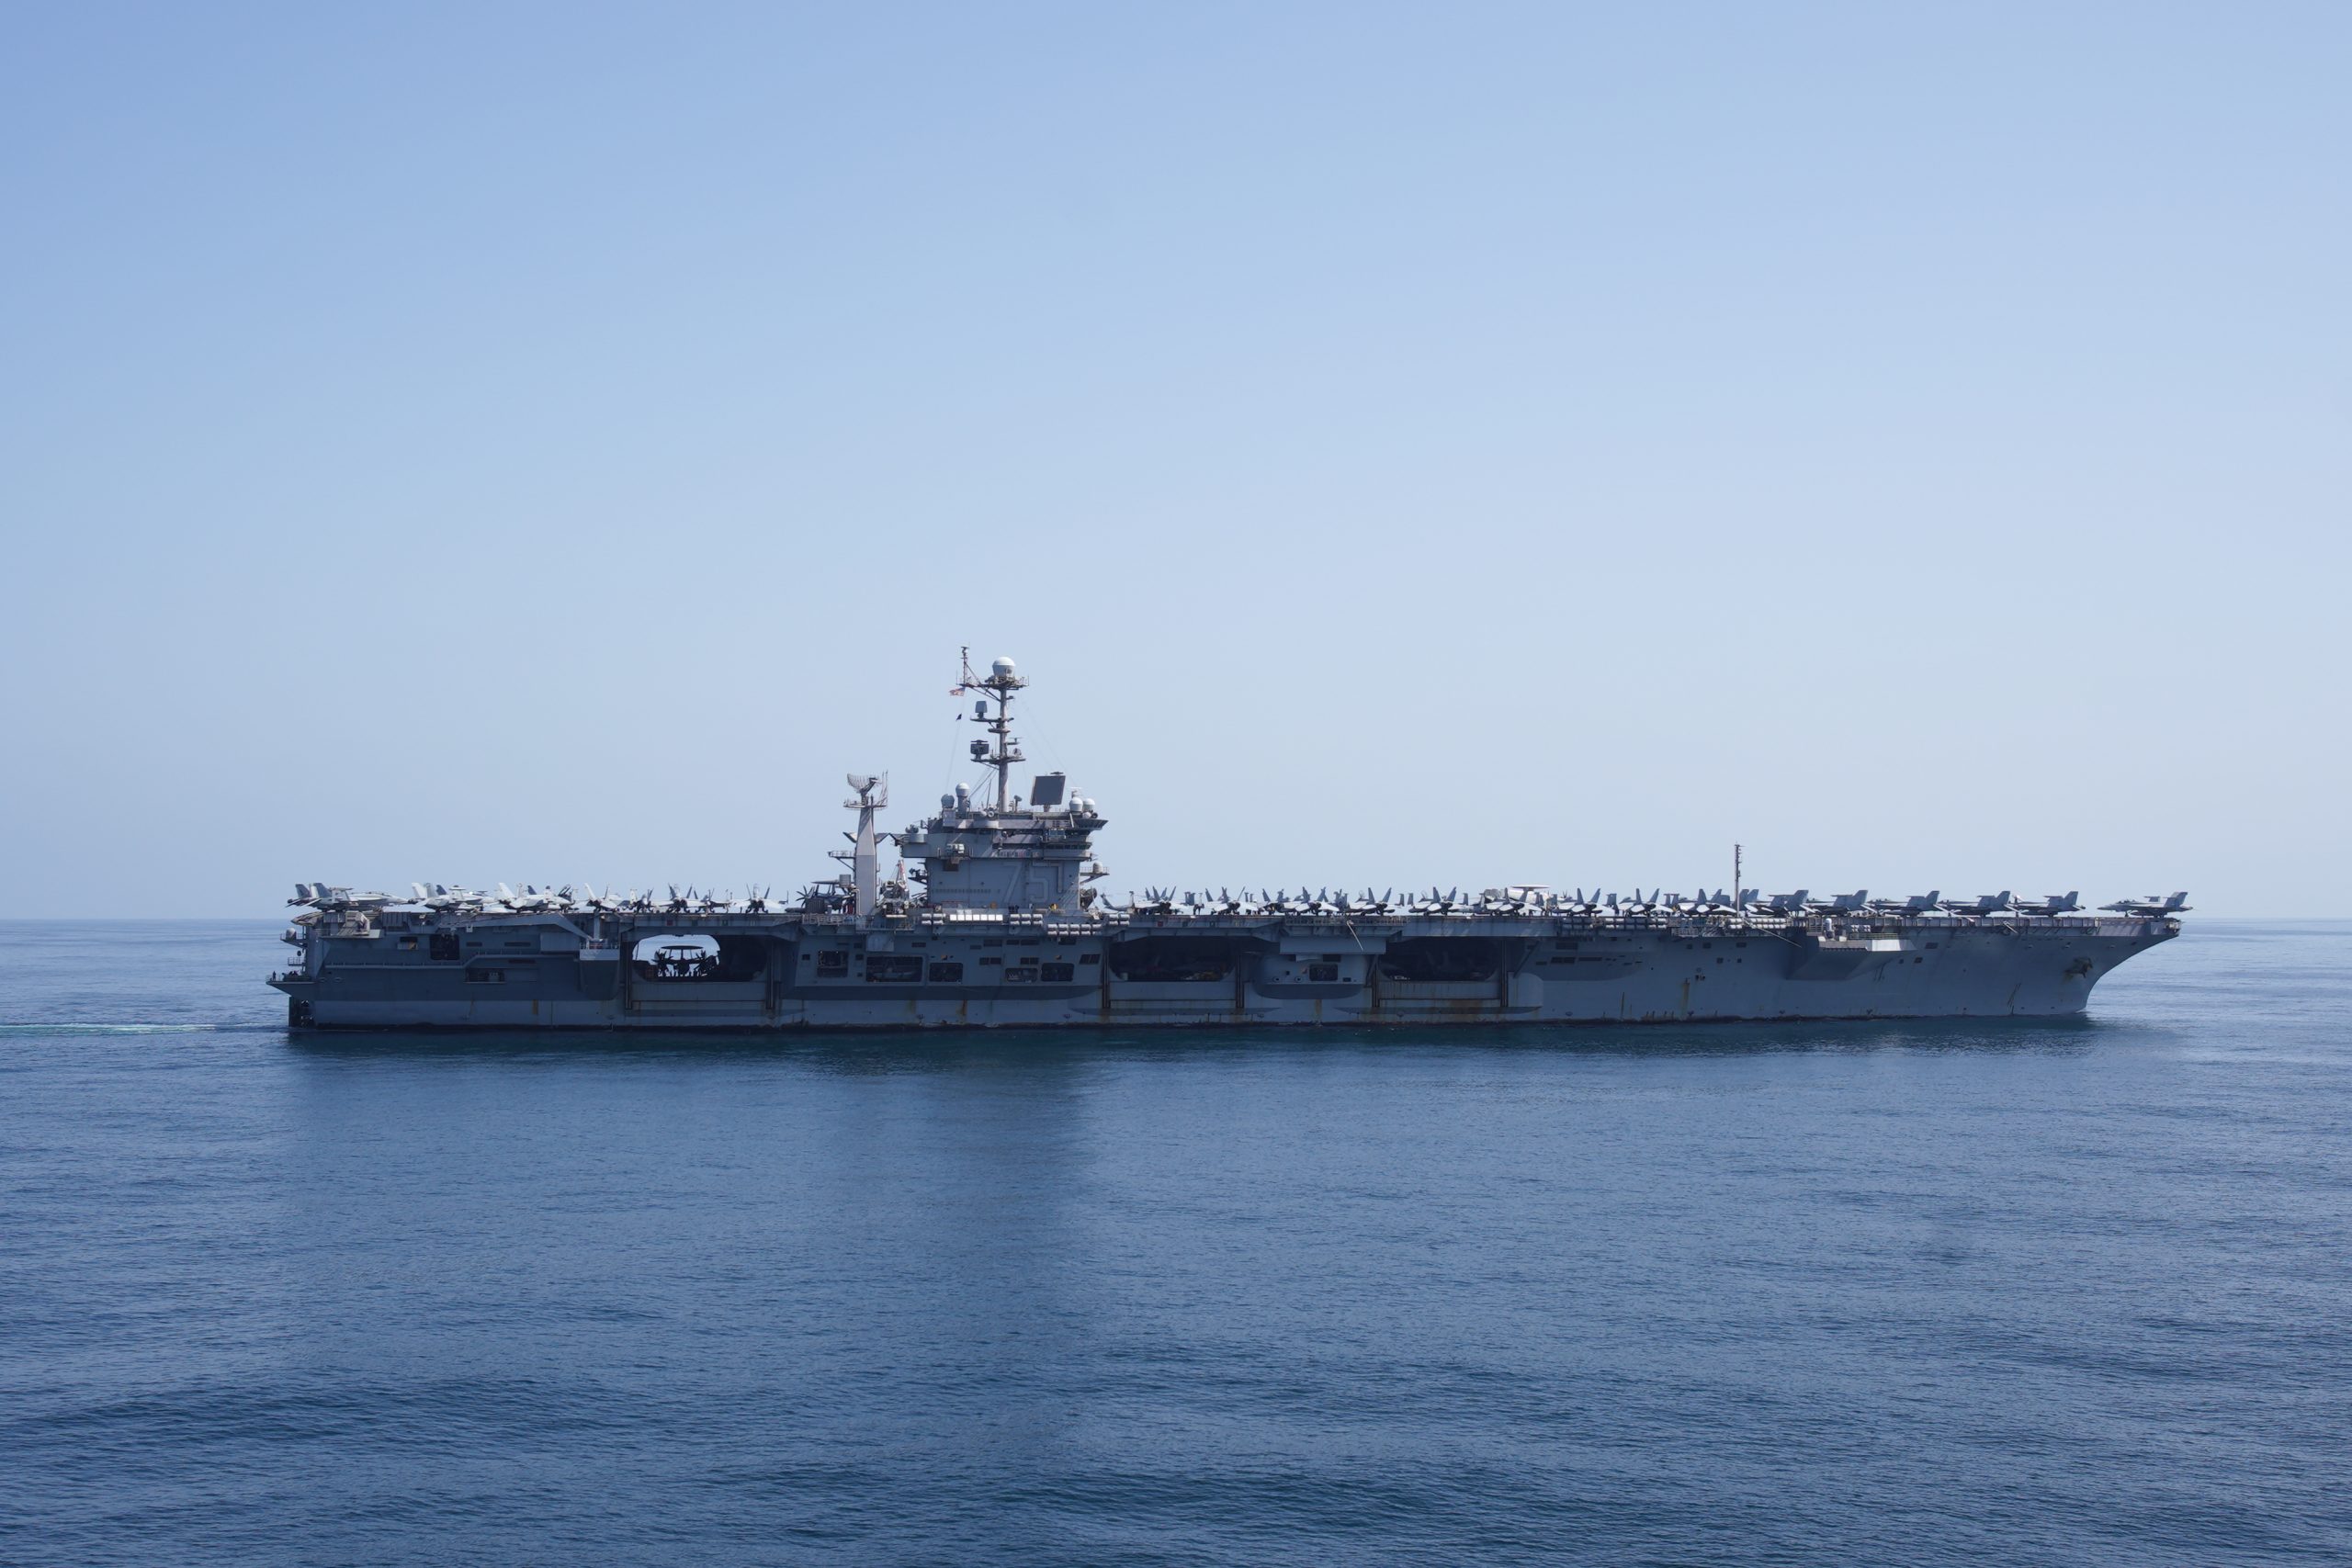 U.S. Sends Second Carrier Strike Group To Mediterranean In Support Of Israel